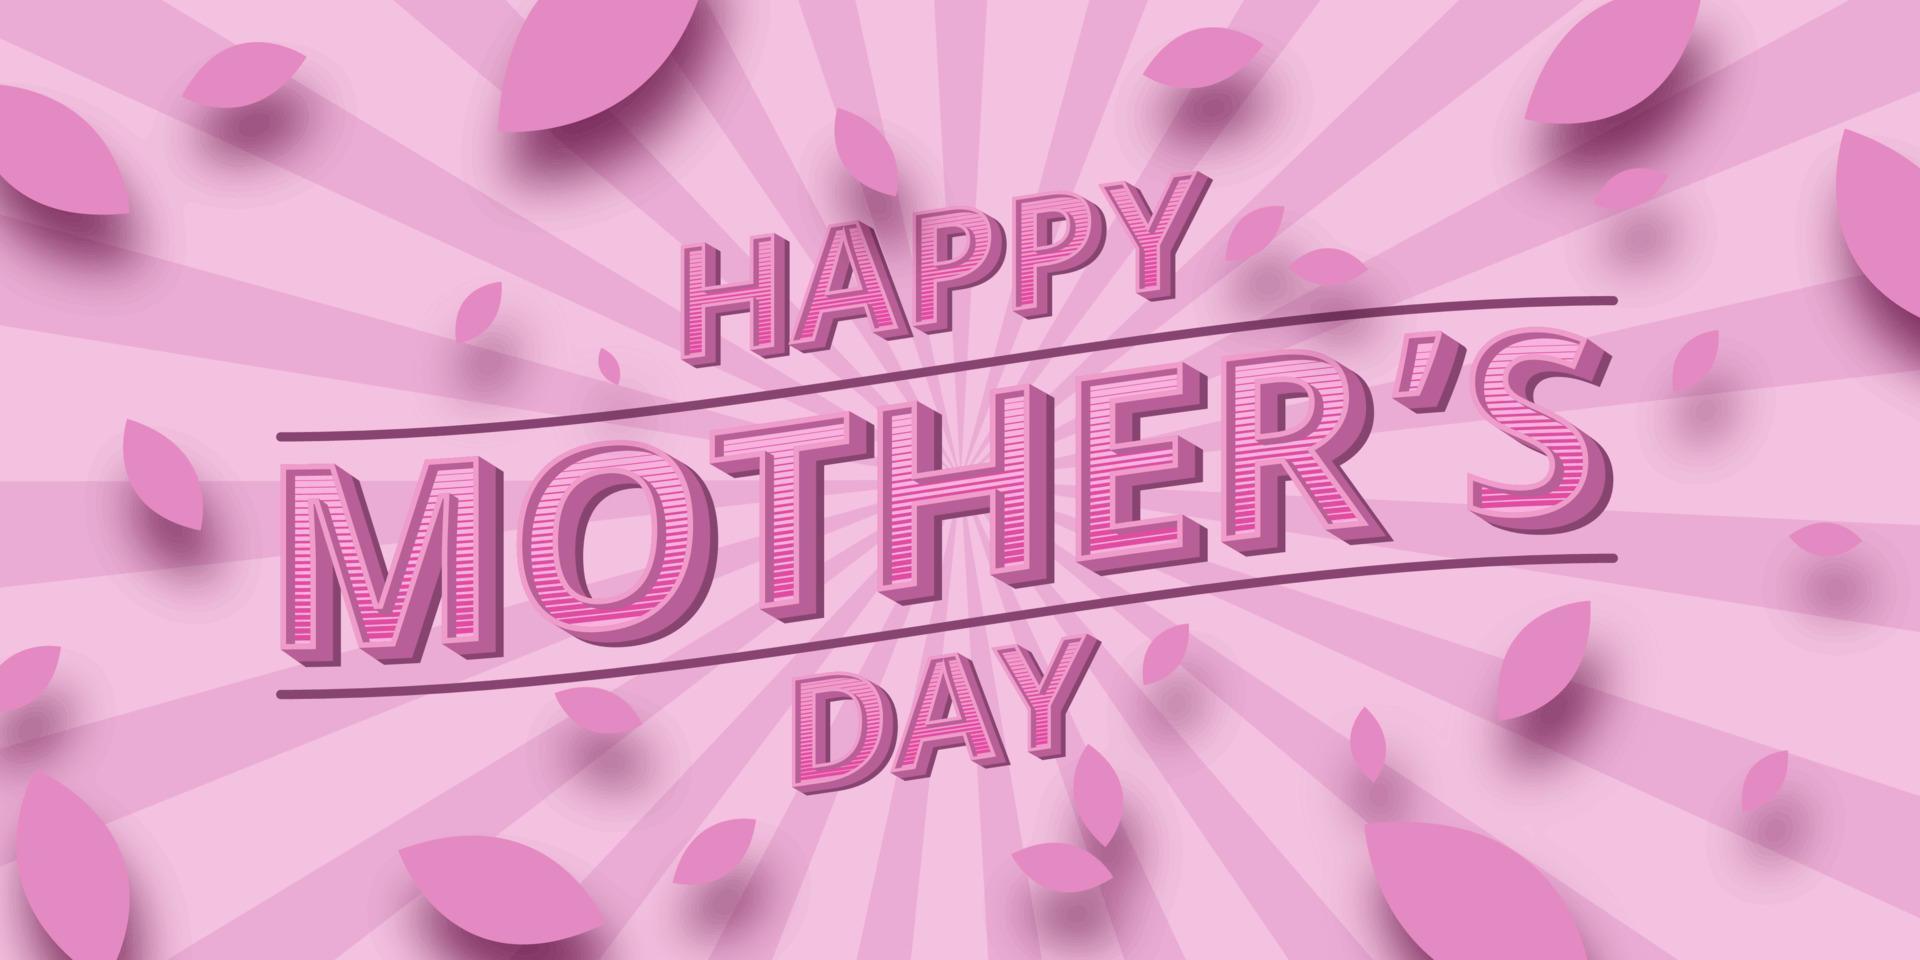 Vector illustration of happy mother's day in vintage style suitable for banners, posters, greeting cards, design templates